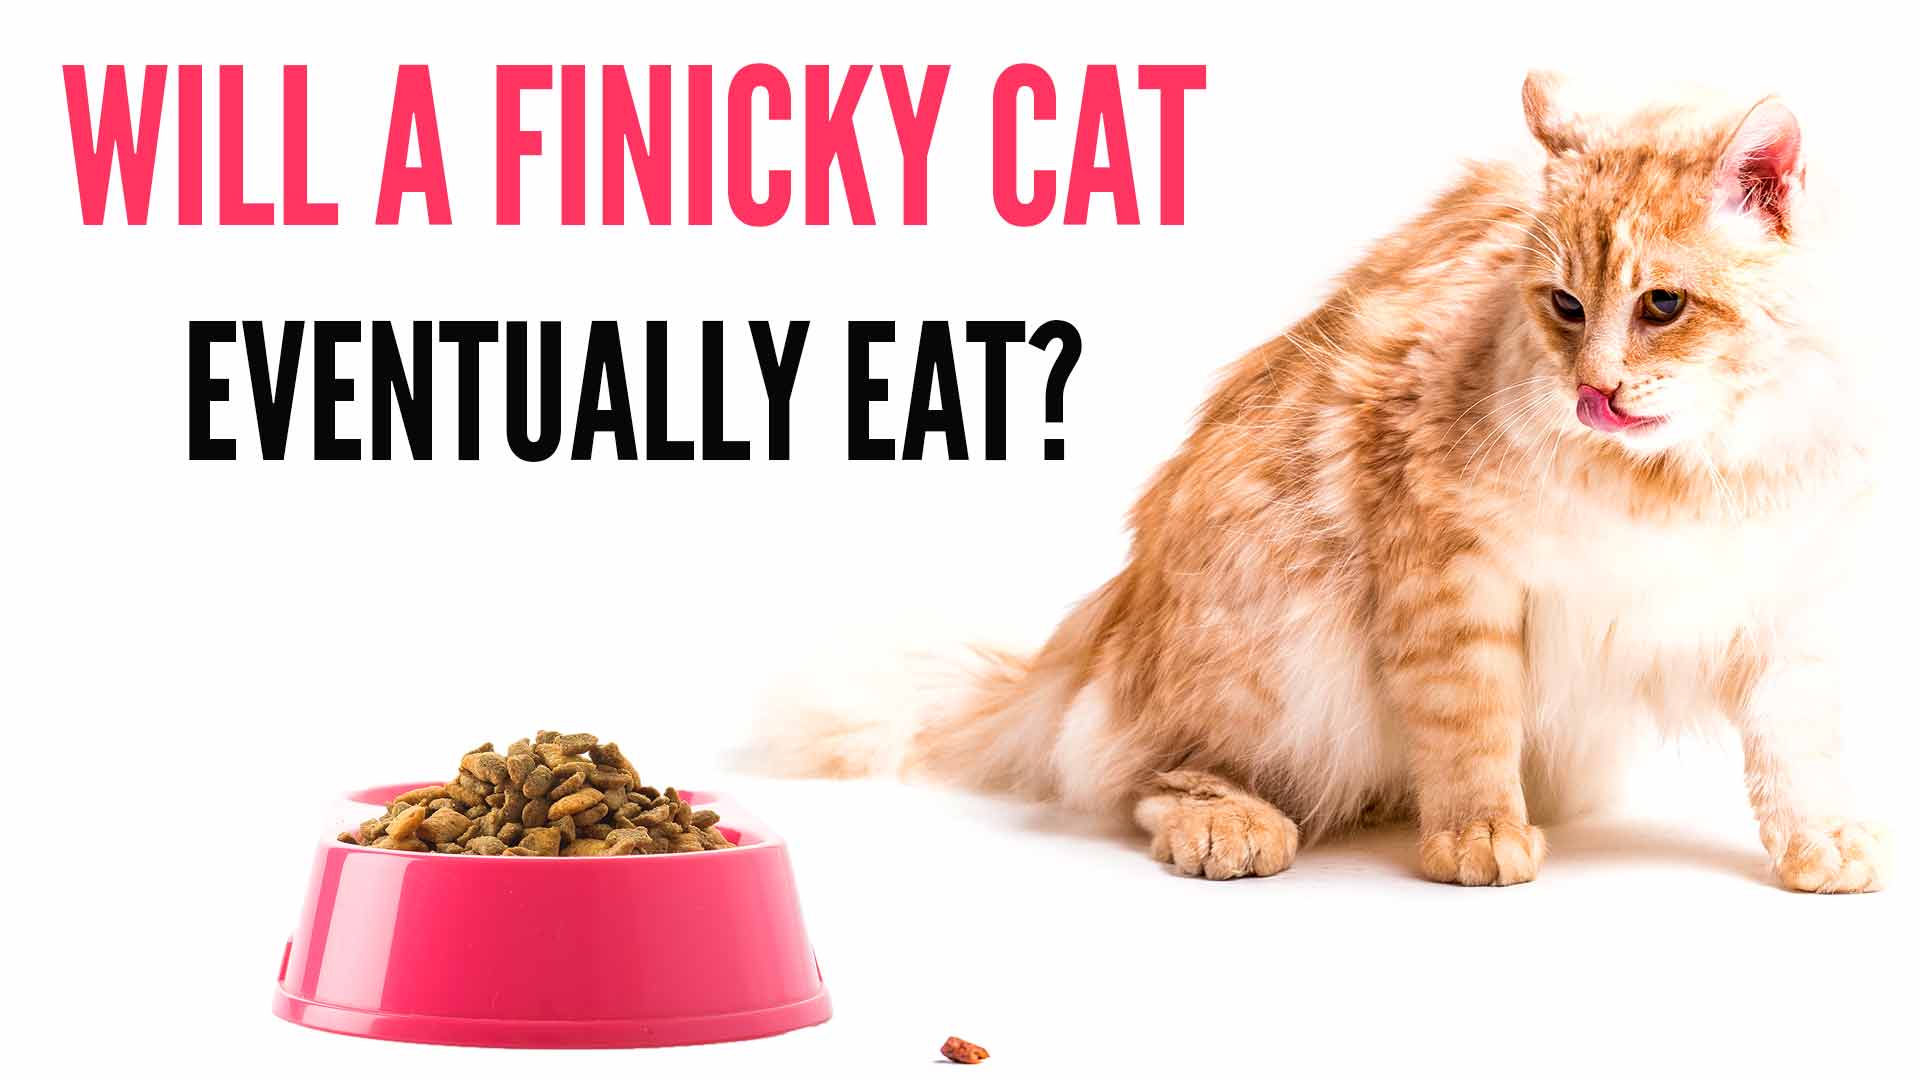 Will A Finicky Cat Eventually Eat? How To Feed A Cat That Won't Eat?